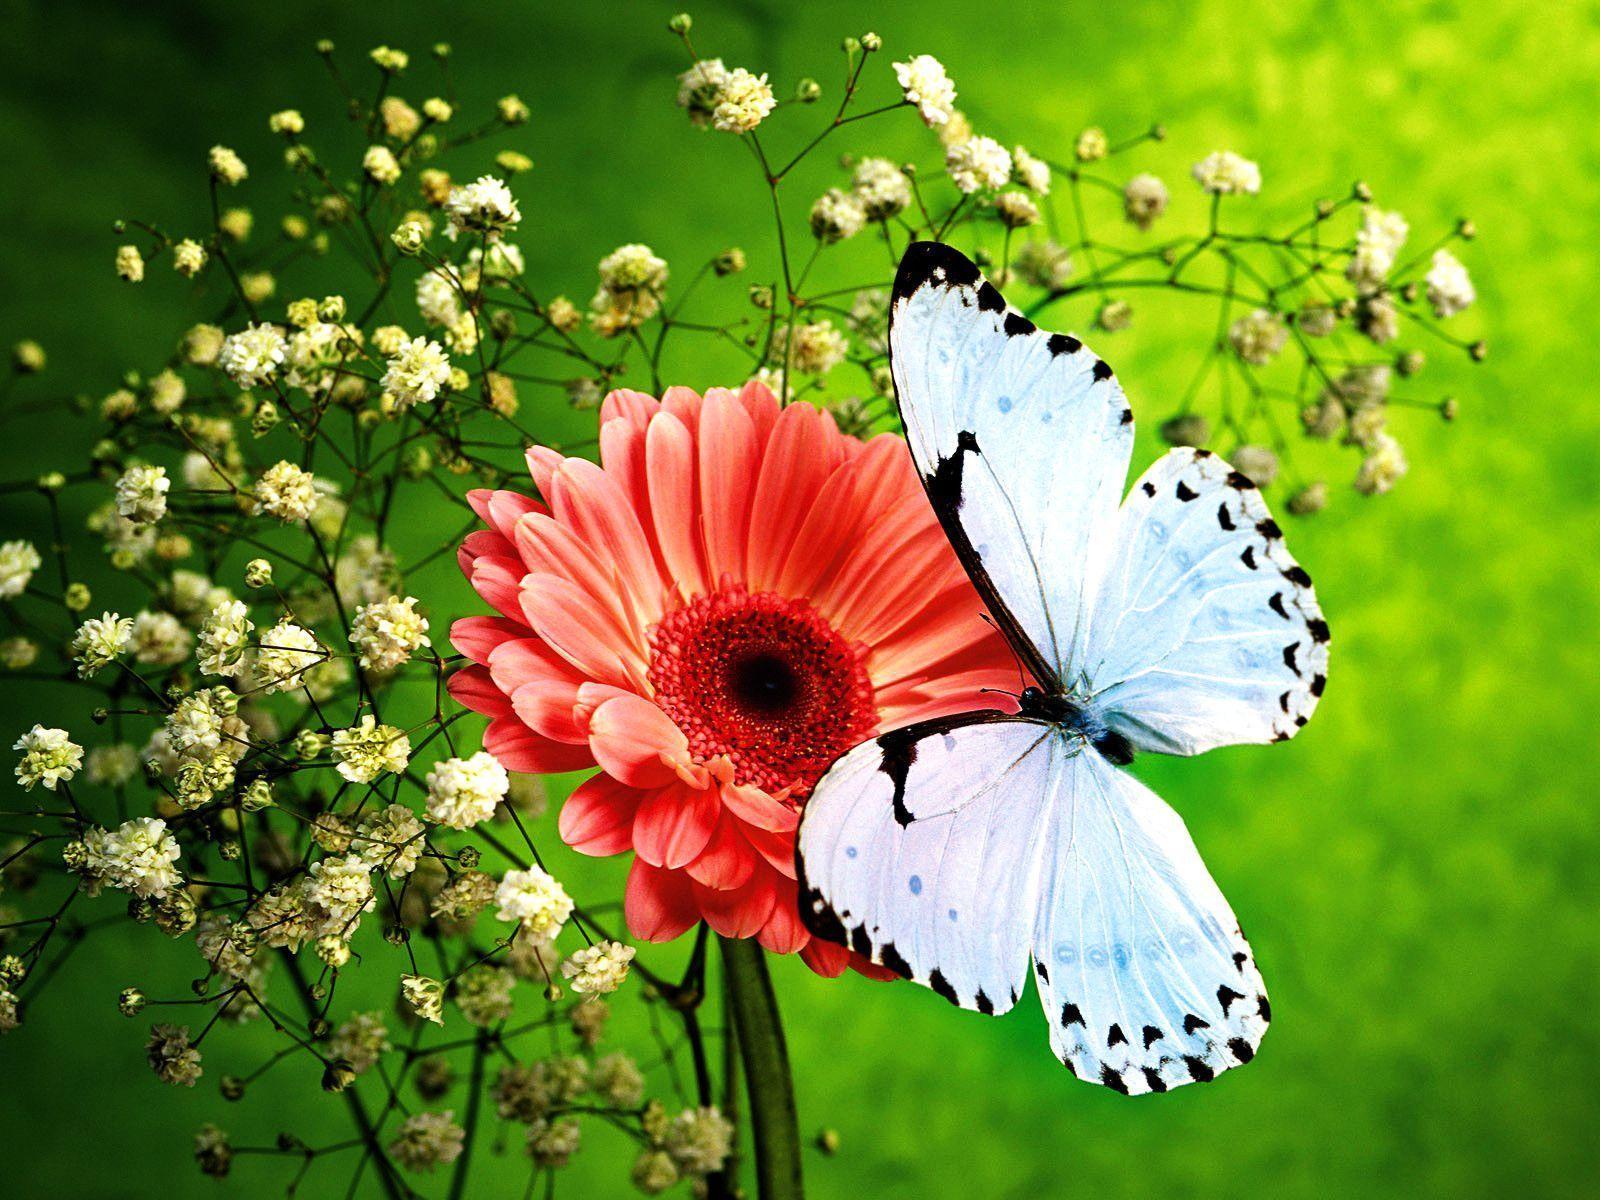 Flowers And White Butterflies Wallpapers 16505 Full HD Wallpapers